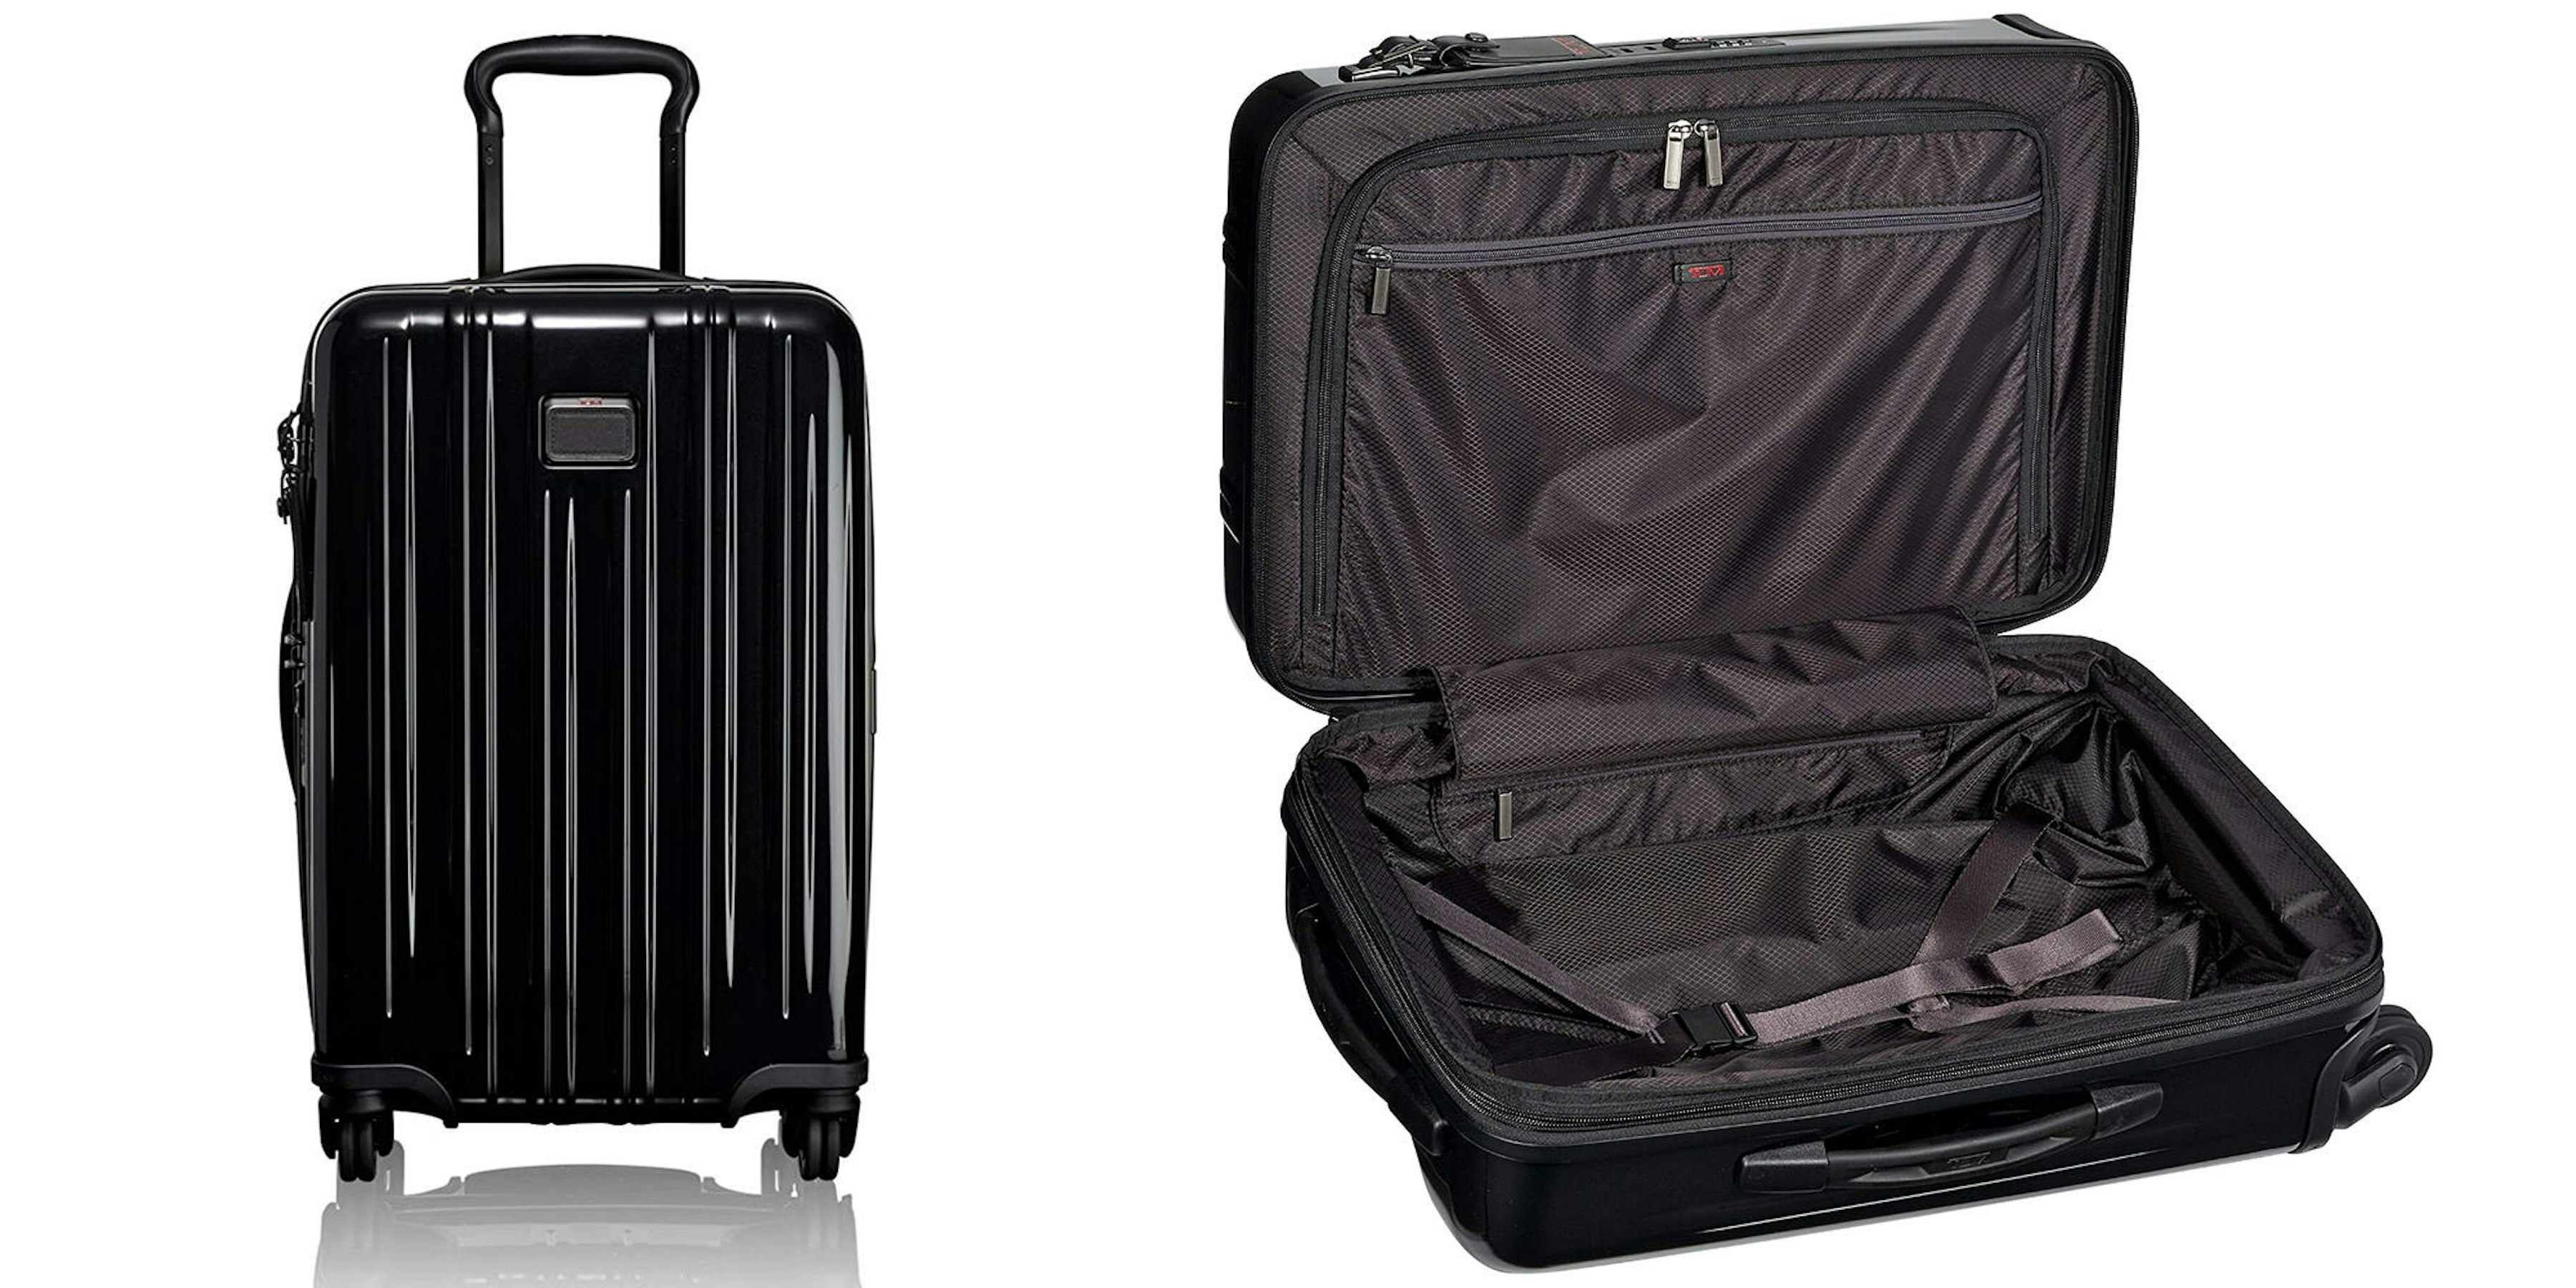 Best Cruise Carry-On Luggage for Those Who Travel Light